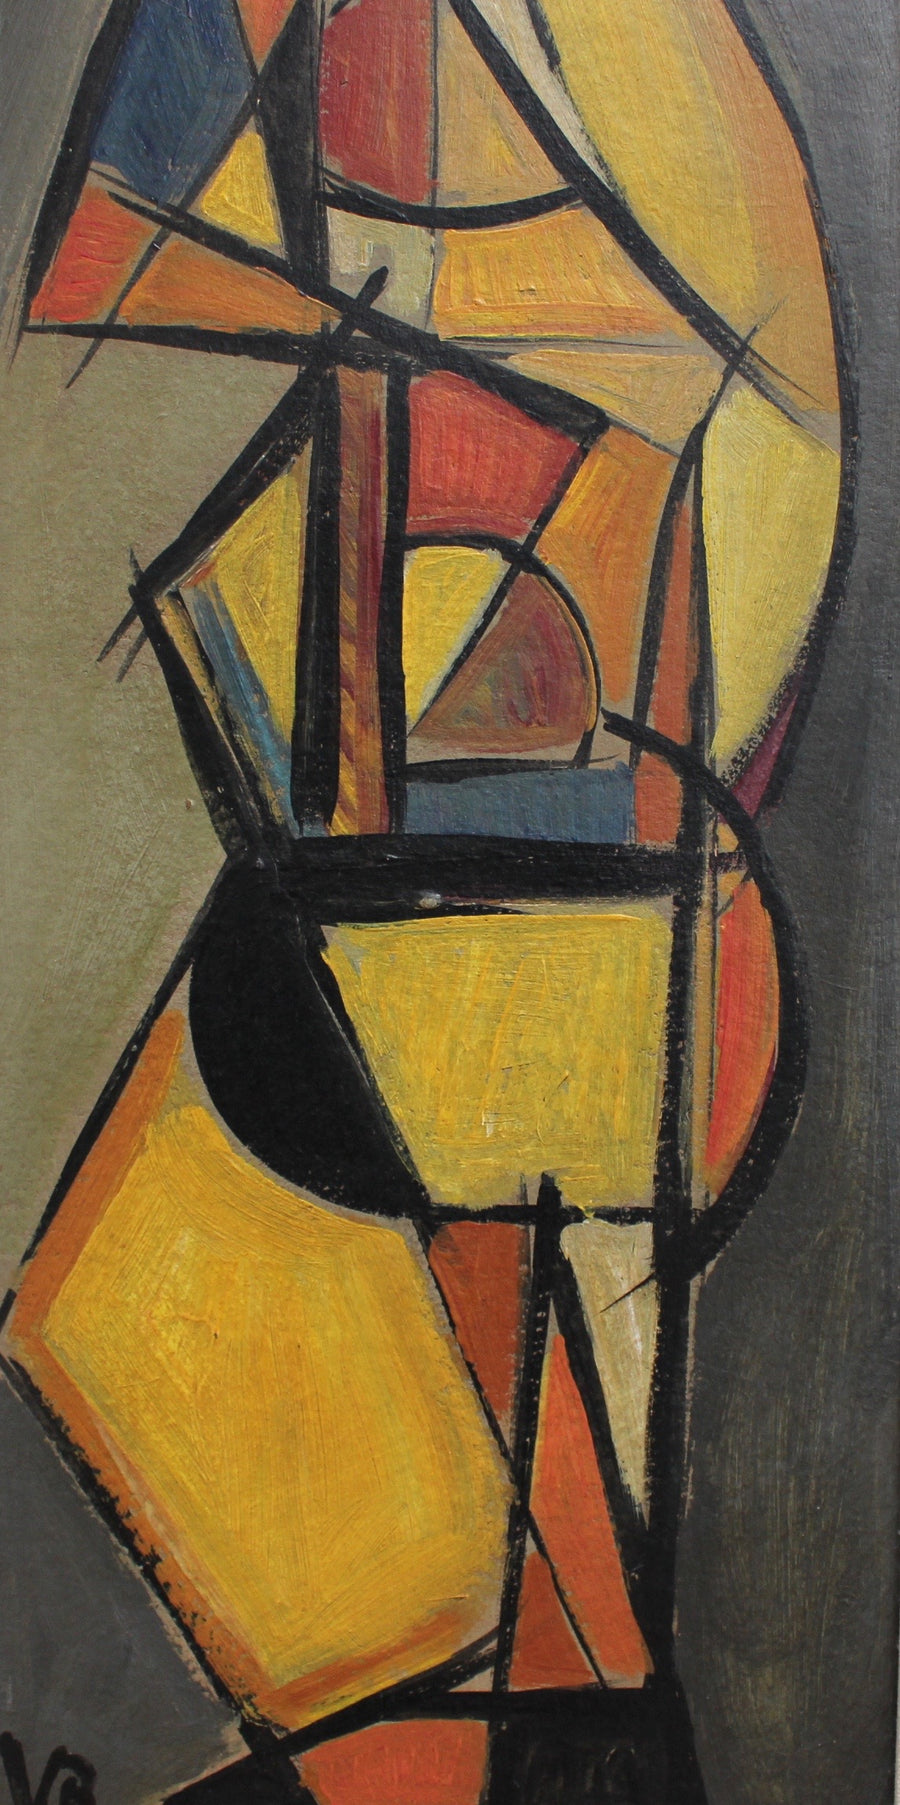 'Pizzicato' Double Bass Player by V.R. (circa 1940s - 50s)